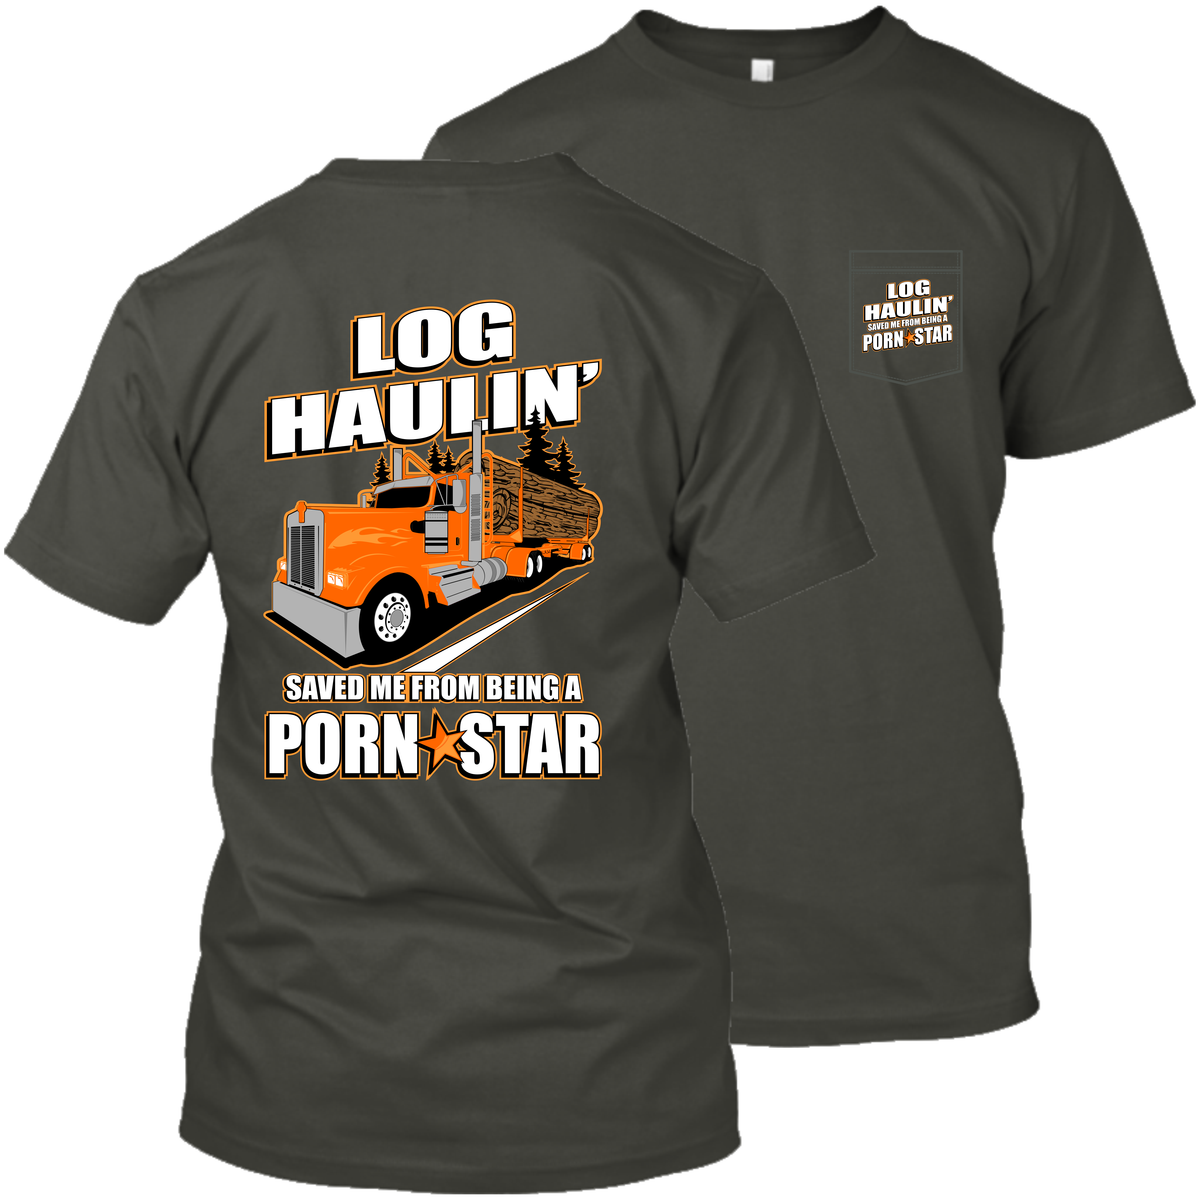 Log Haulin' Saved Me From Being a Porn Star - Kenworth